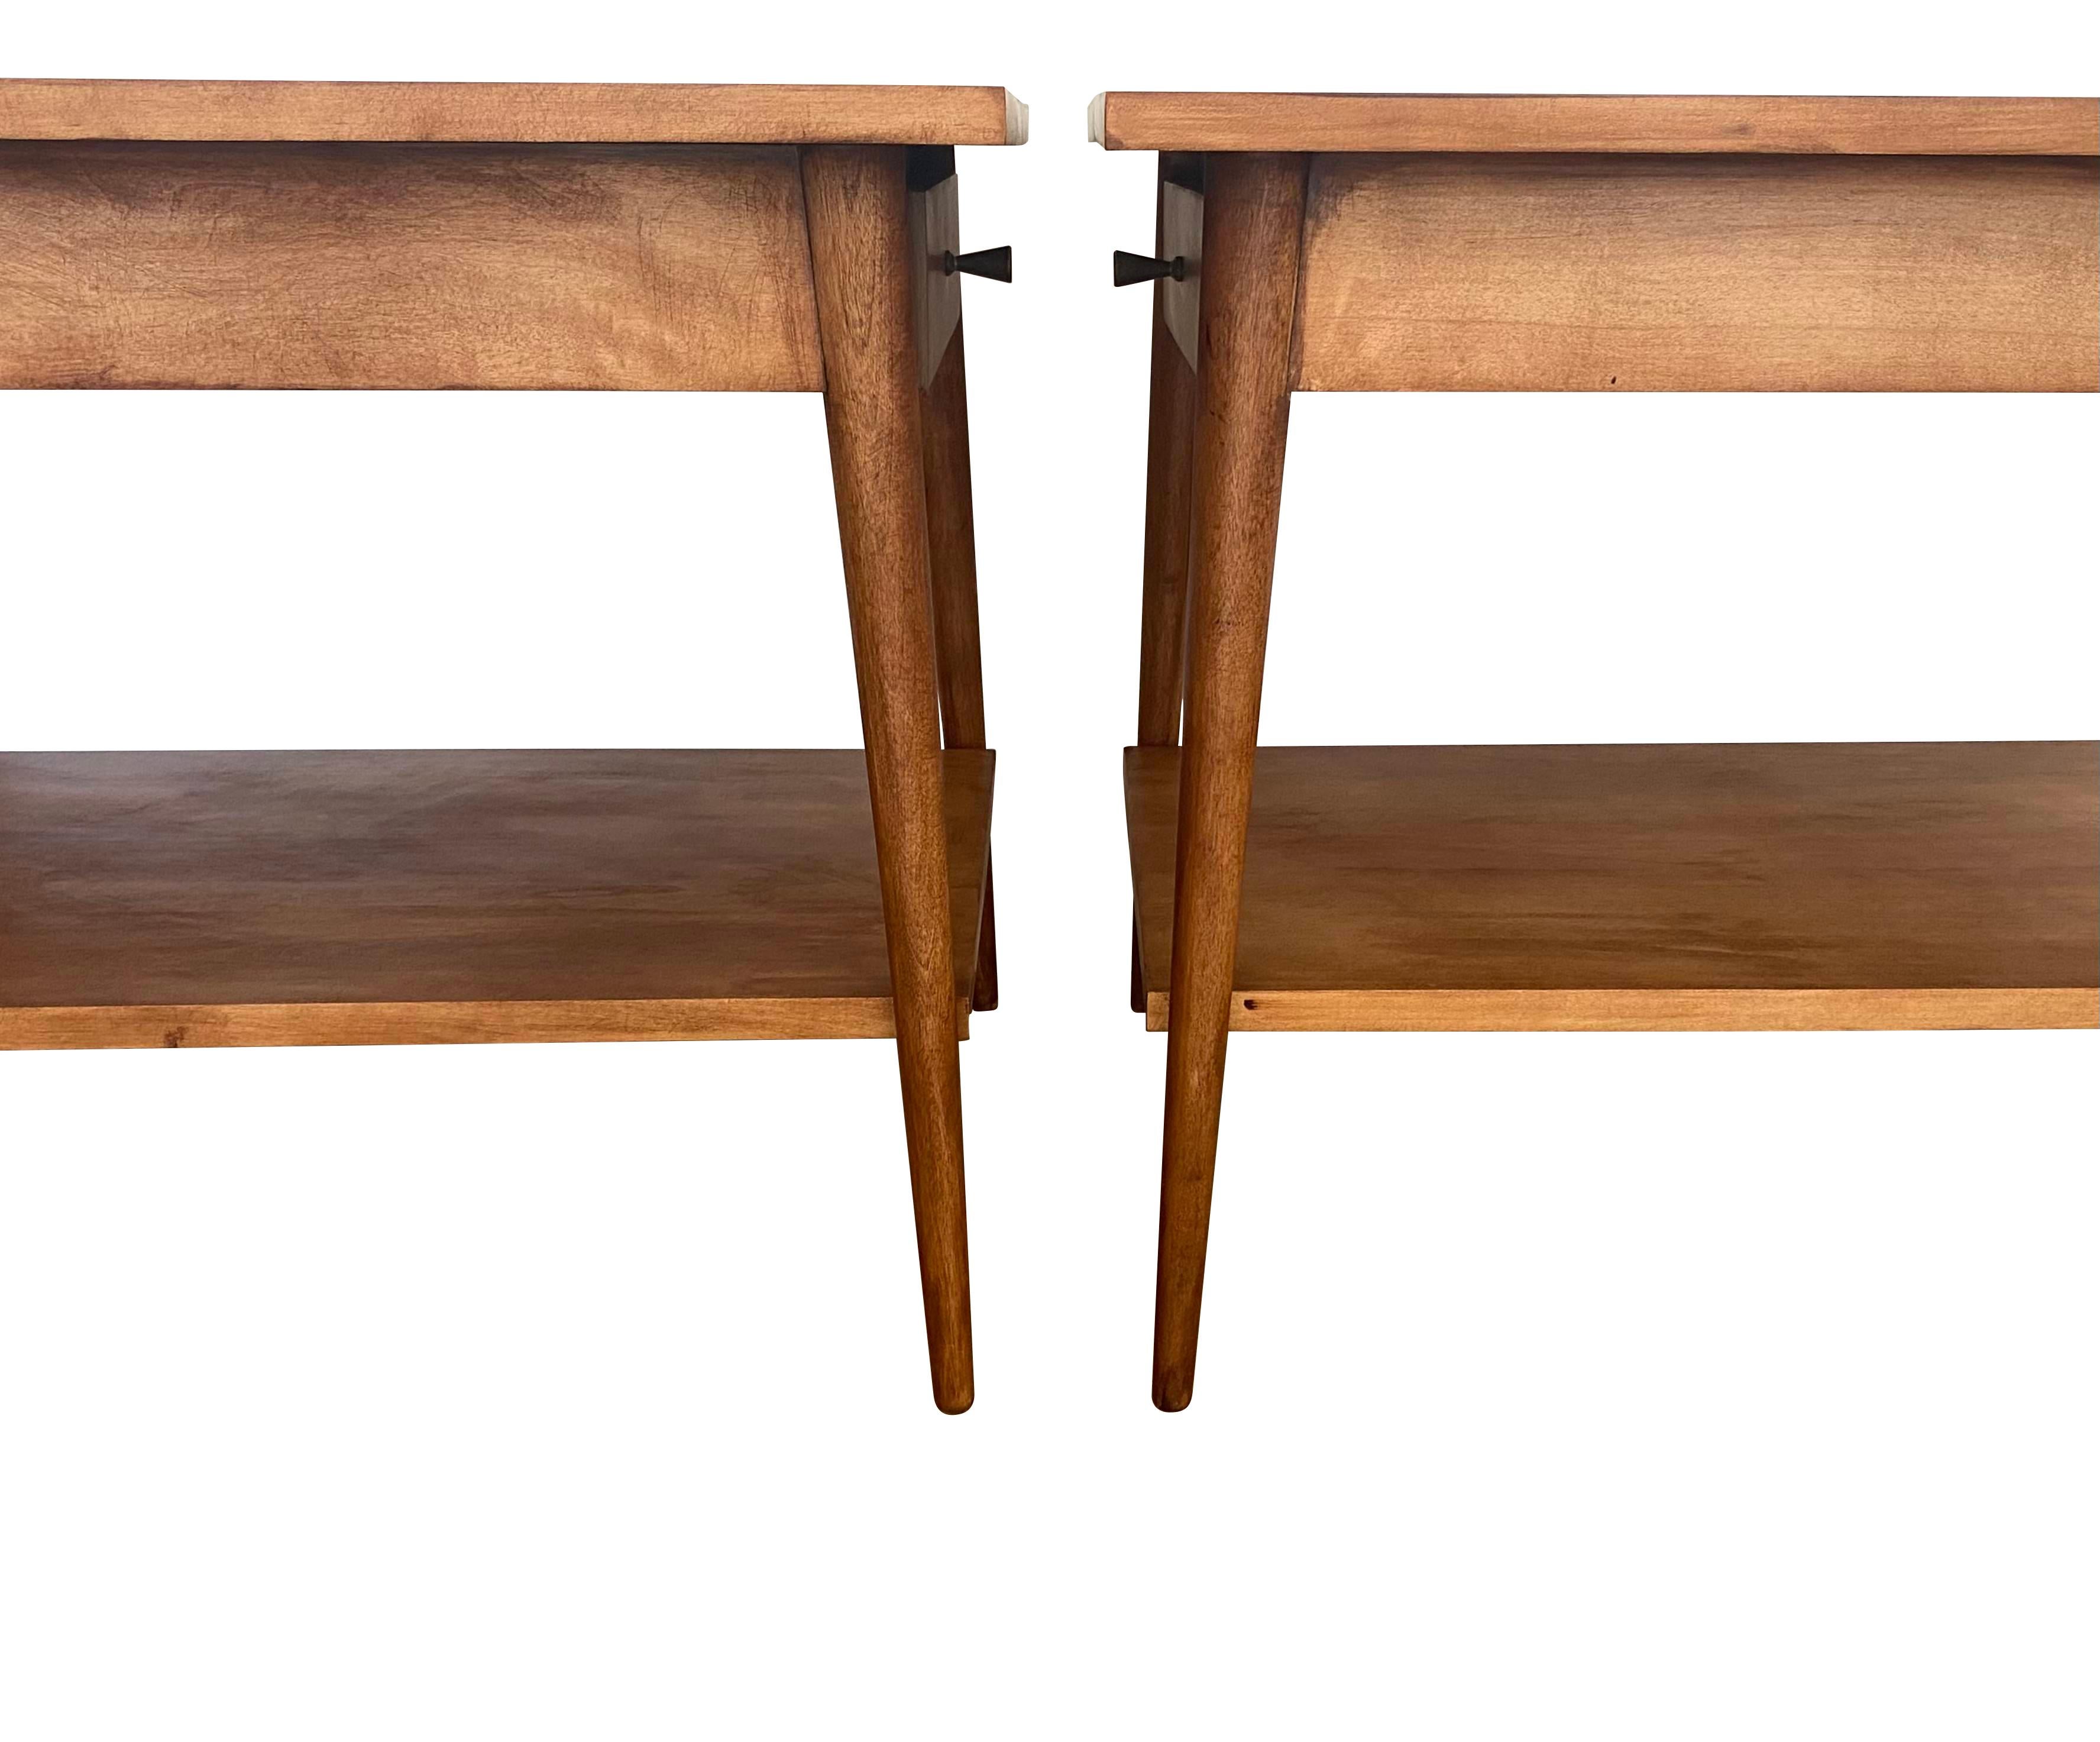 Handsome and elegant pair of nightstands designed by Paul McCobb. Part of the Planner Group collection and manufactured by Winchendon Furniture Company. Refinished and looking sharp. Original pulls. Signed and guaranteed authentic. Drawers function